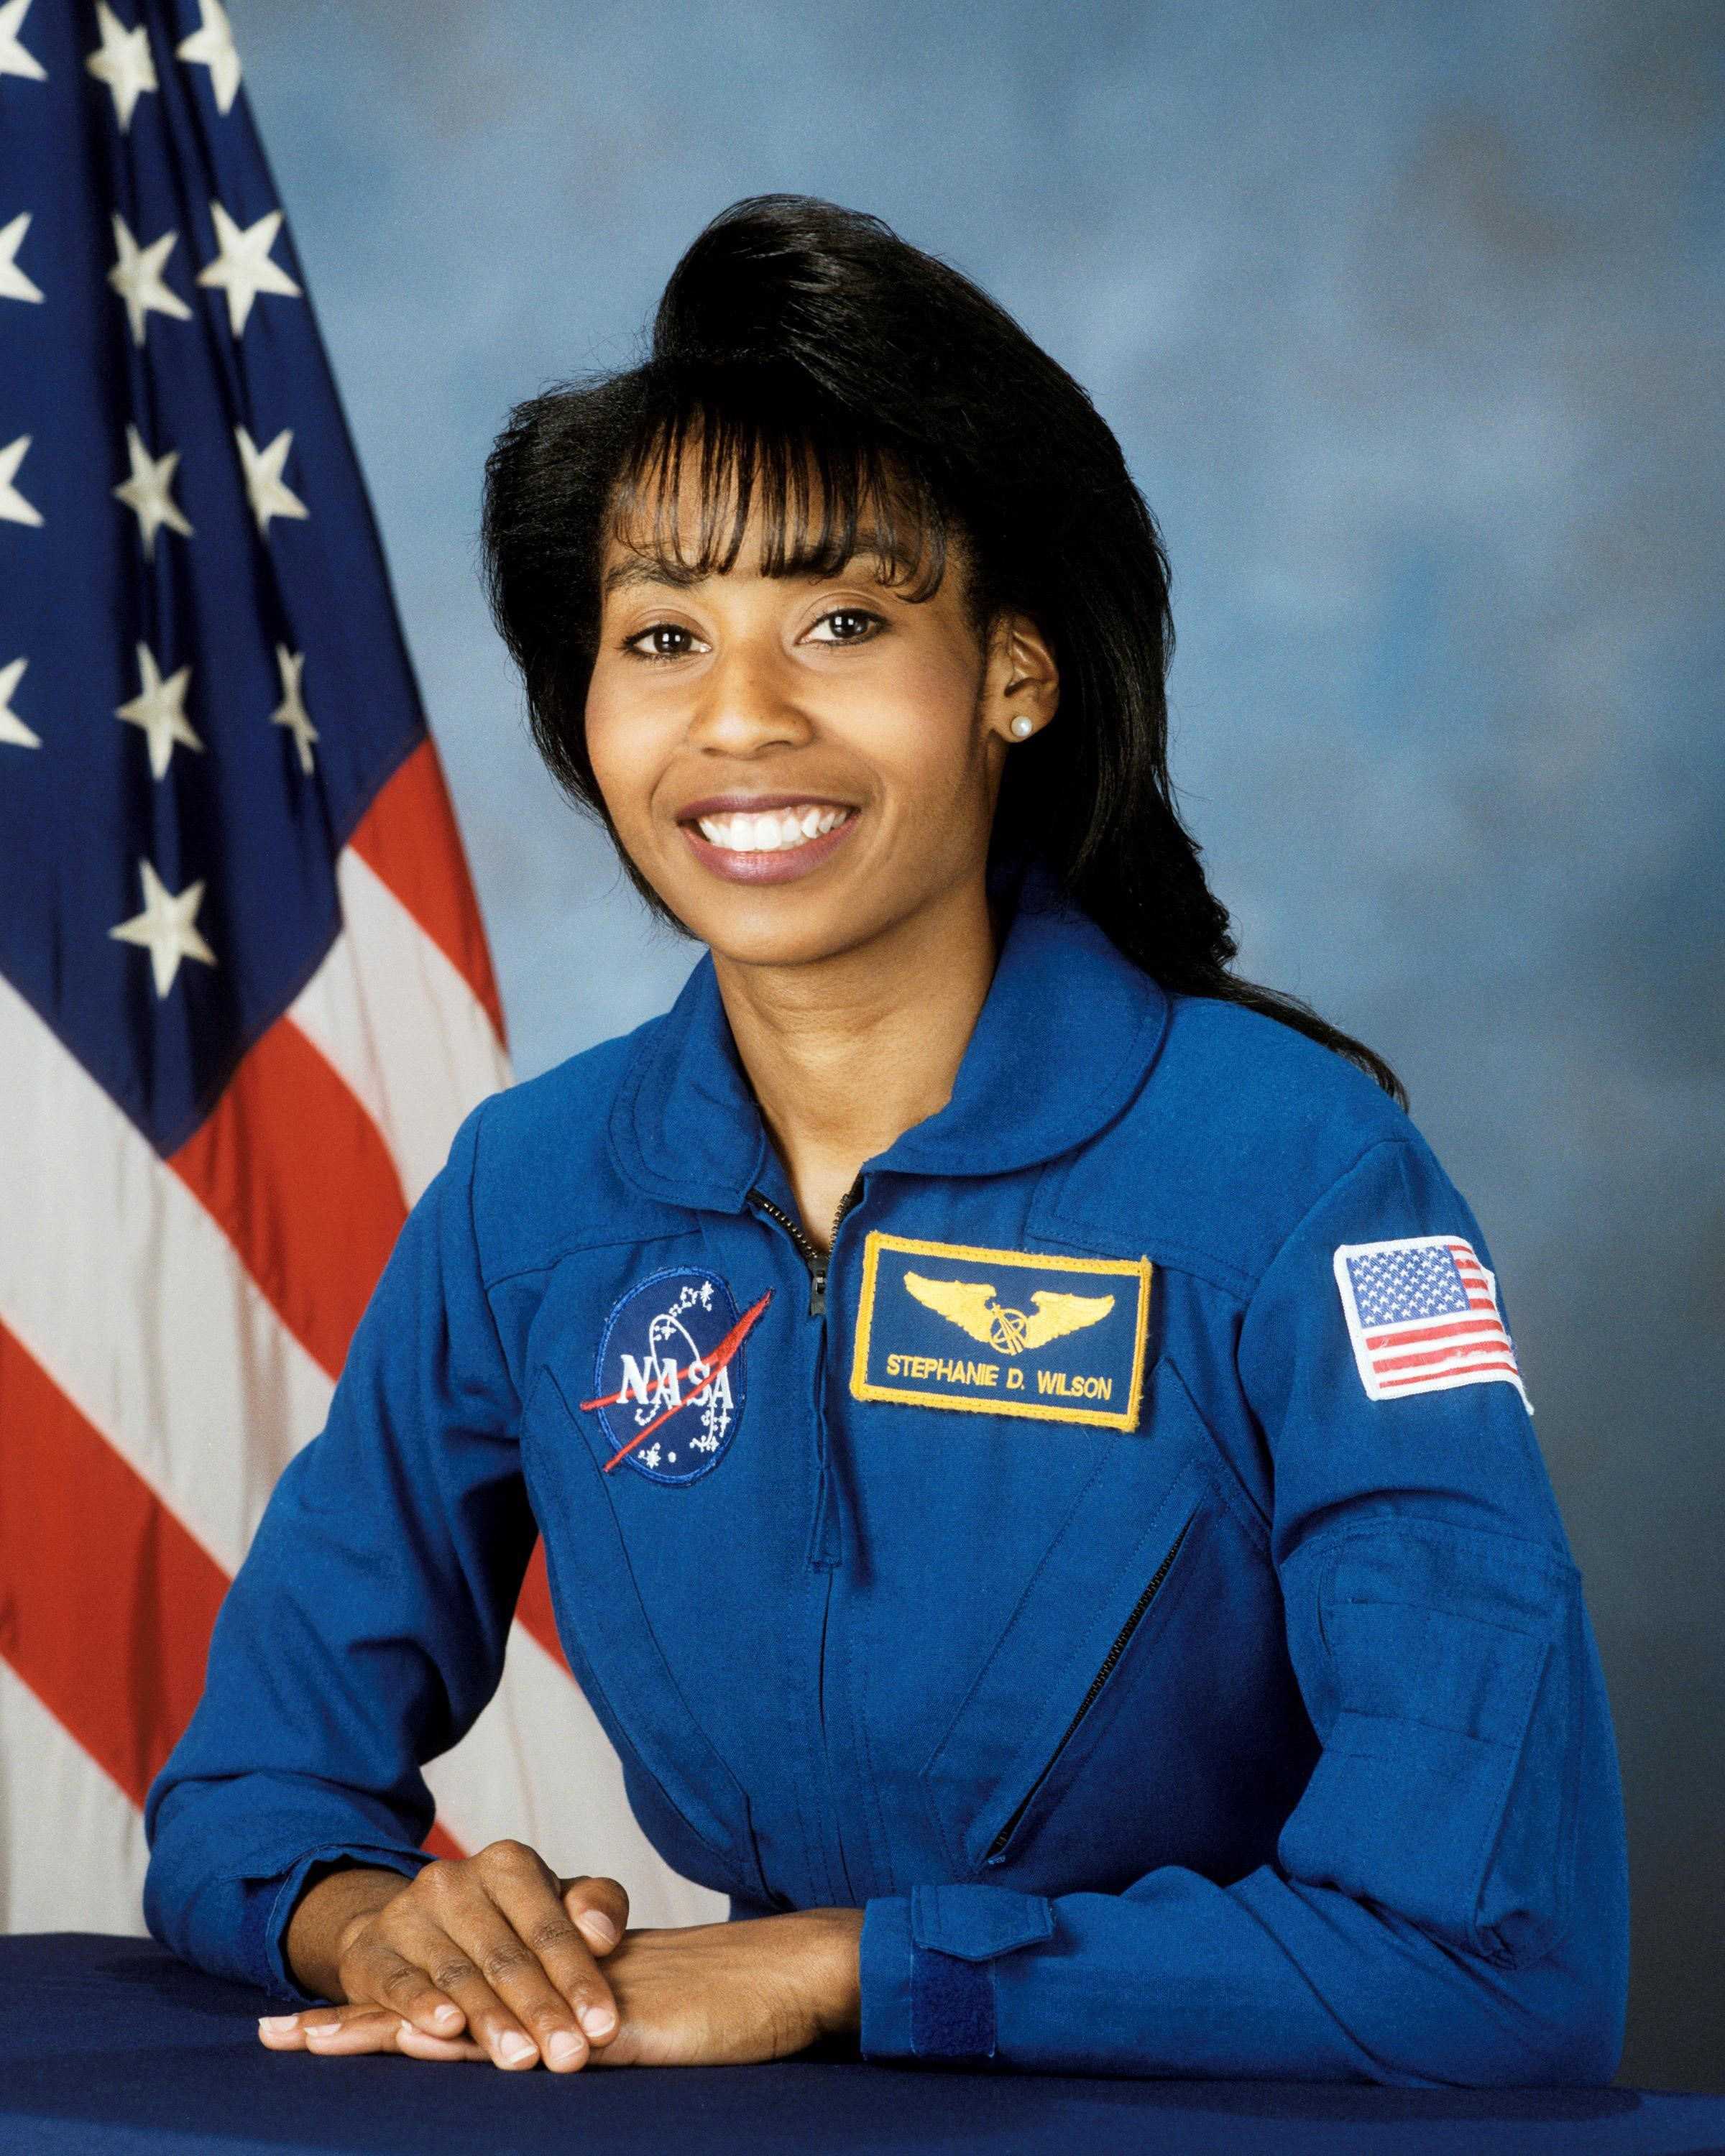 Wilson is wearing a blue NASA uniform and is sitting with her hands crossed on a table.